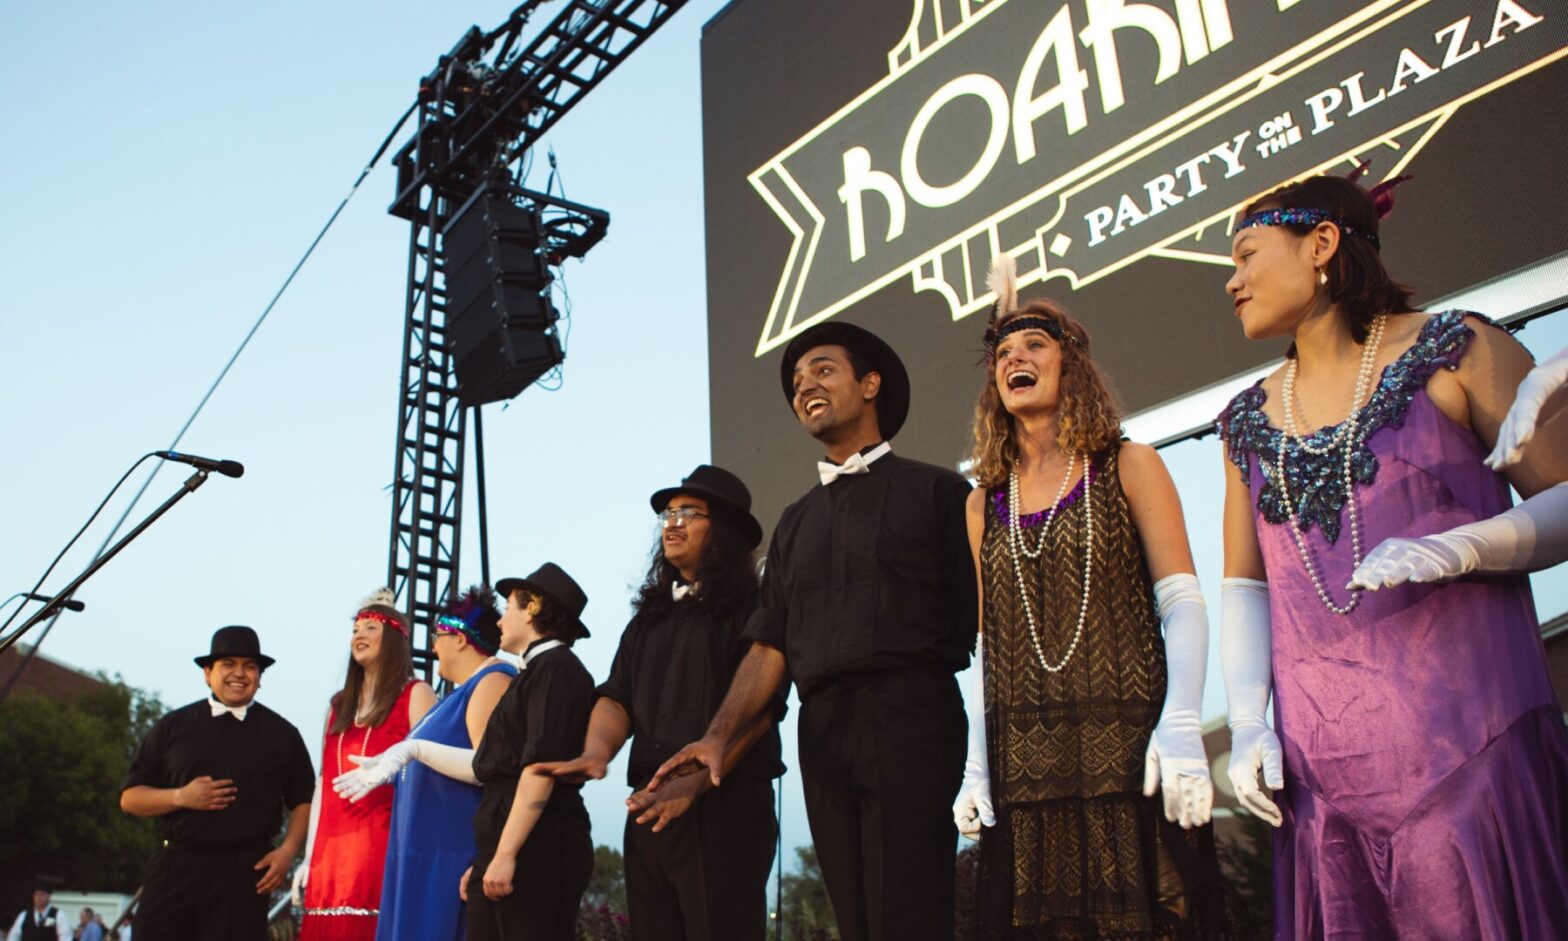 The Newman troubadours perform in flapper dresses and caps during the roaring 20's themed Party on the Plaza.